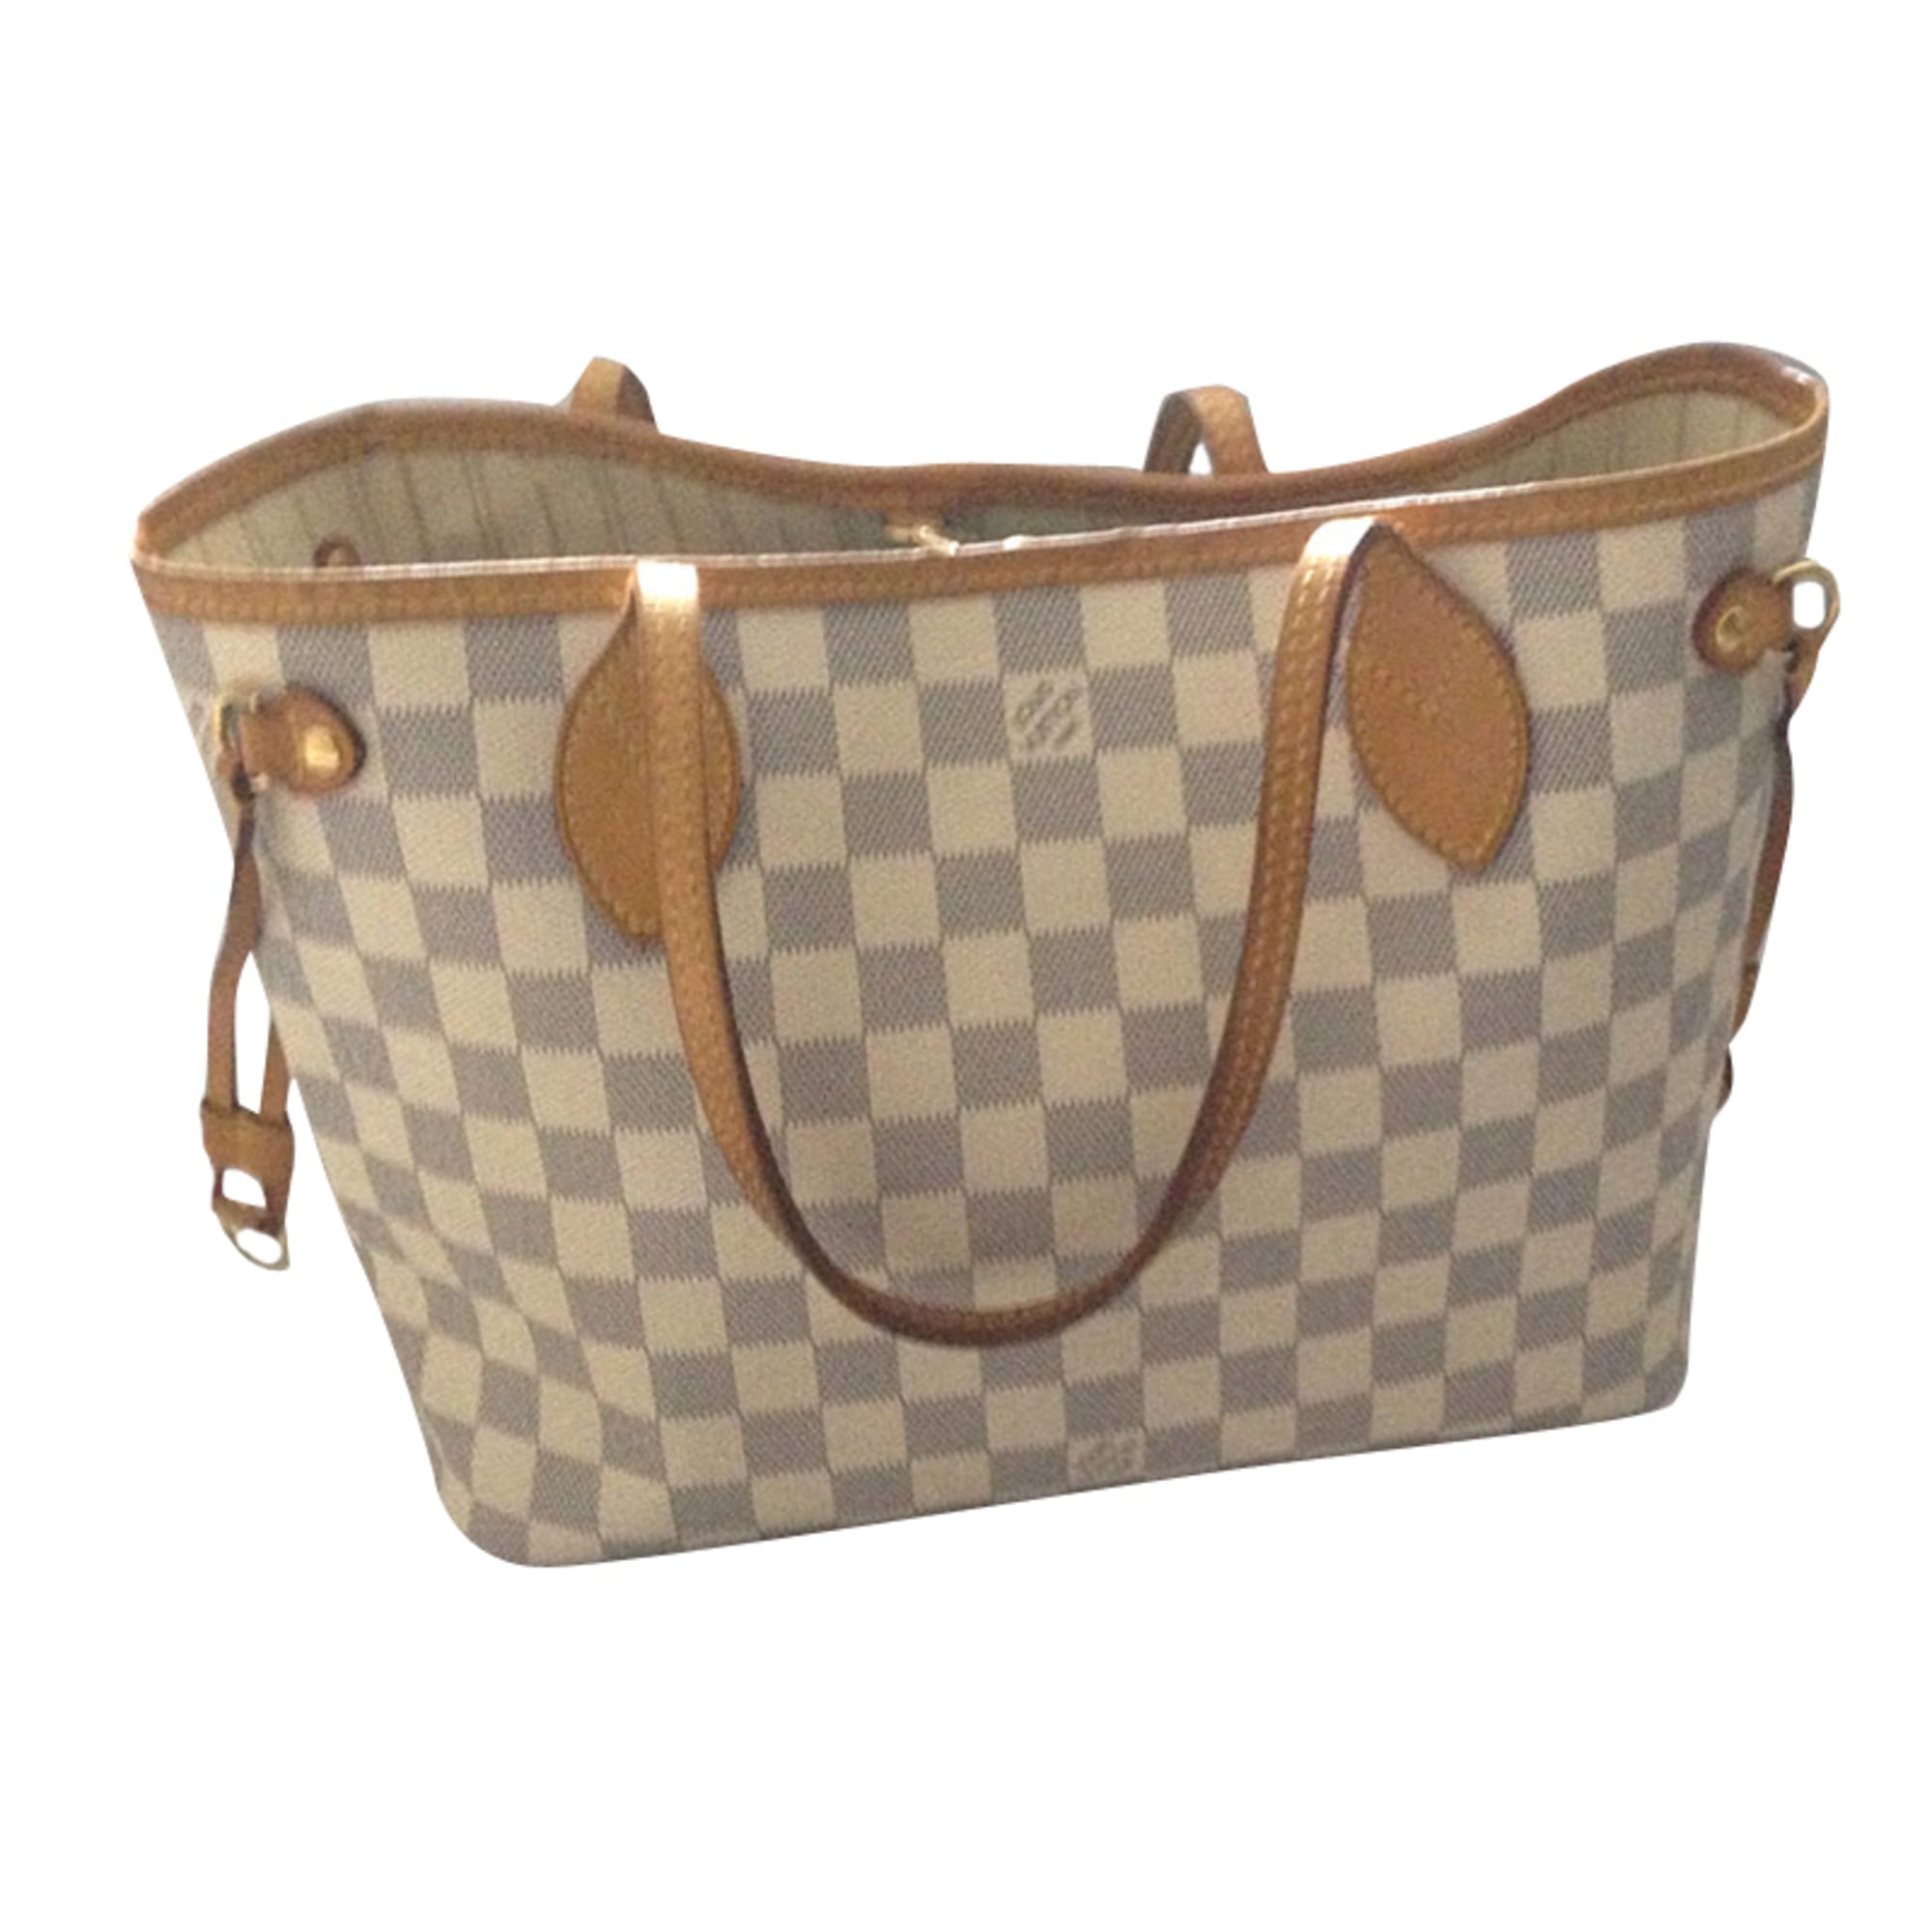 Sac Louis Vuitton Neverfull Damier Blanc | Confederated Tribes of the Umatilla Indian Reservation